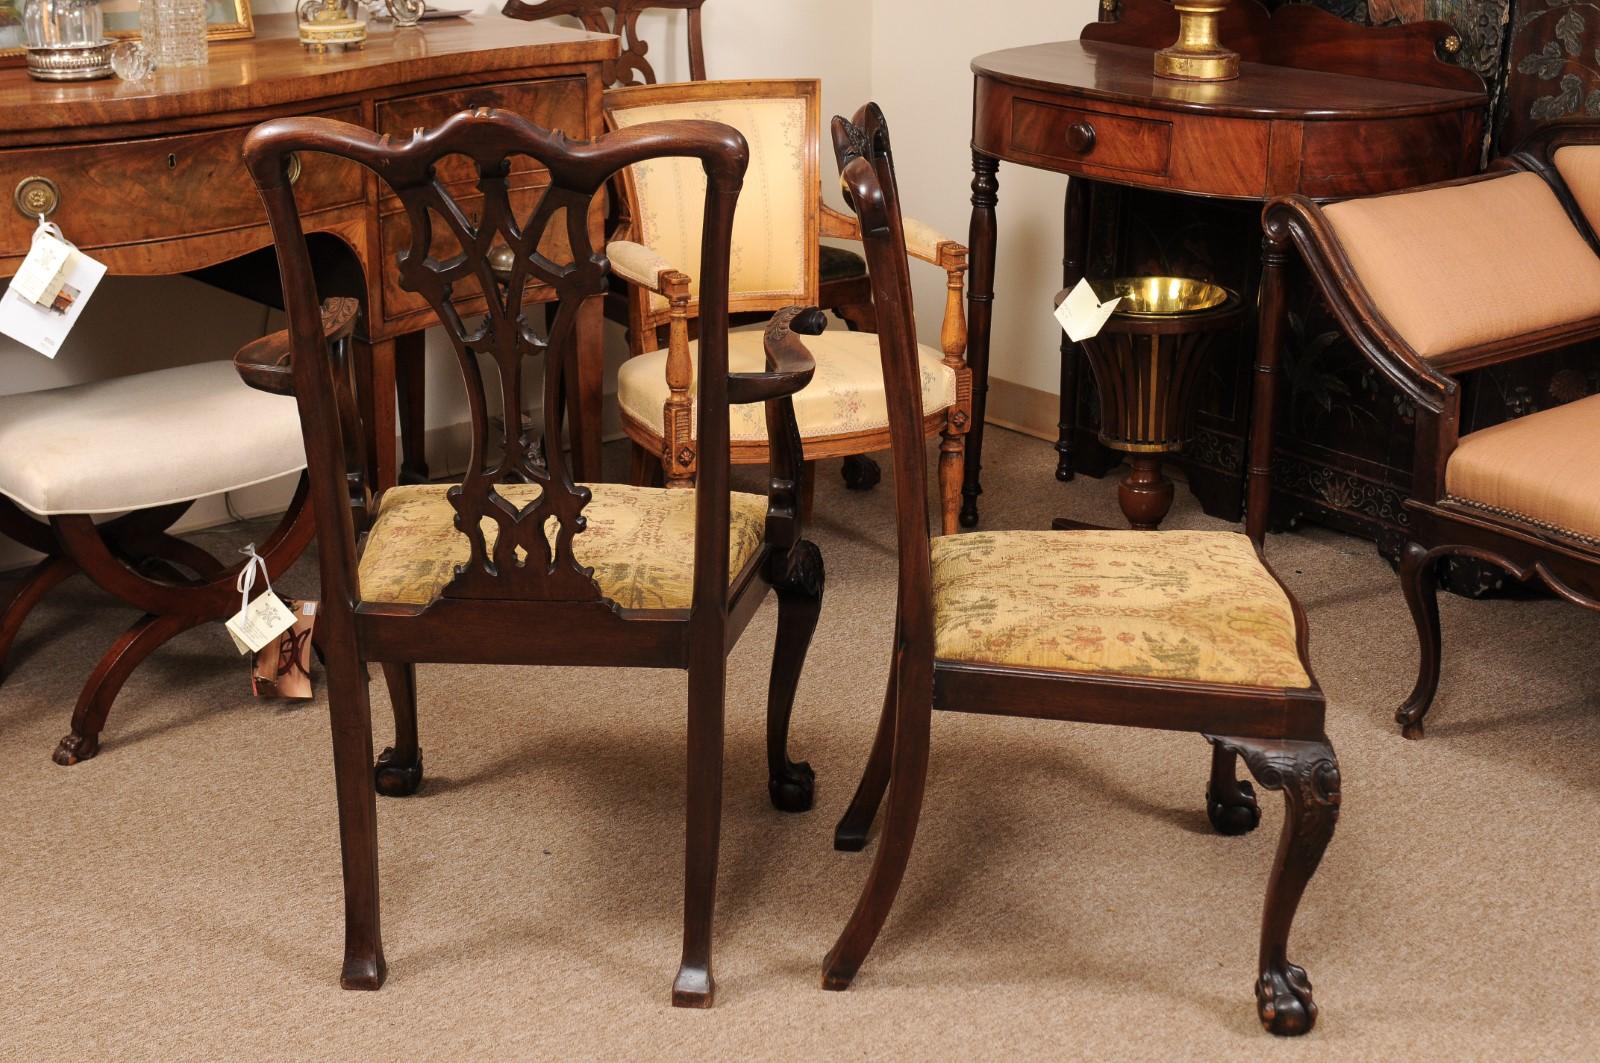 Set of 19th century English Chippendale style dining chairs in mahogany with pierced backsplats, ball & claw feet, and upholstered slip seats. Set includes 2 armchairs and 6 side chairs.
Arm chair dimensions: 26